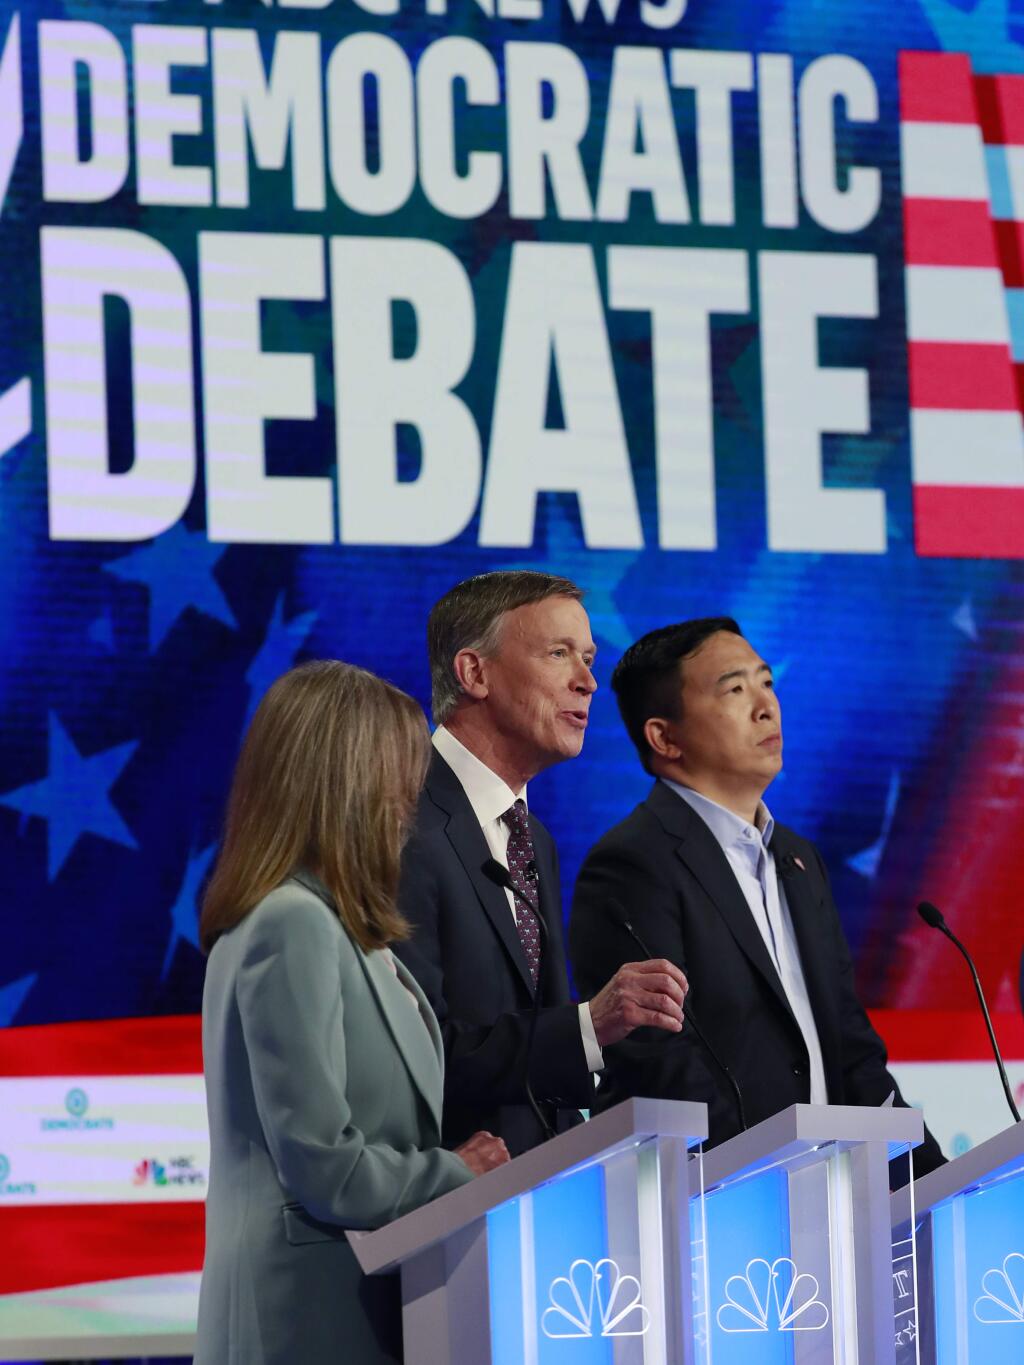 Democratic presidential candidate former Colorado Gov. John Hickenlooper, center, speaks during the Democratic primary debate hosted by NBC News at the Adrienne Arsht Center for the Performing Arts, Thursday, June 27, 2019, in Miami, as author Marianne Williamson and entrepreneur Andrew Yang listen. (AP Photo/Wilfredo Lee)